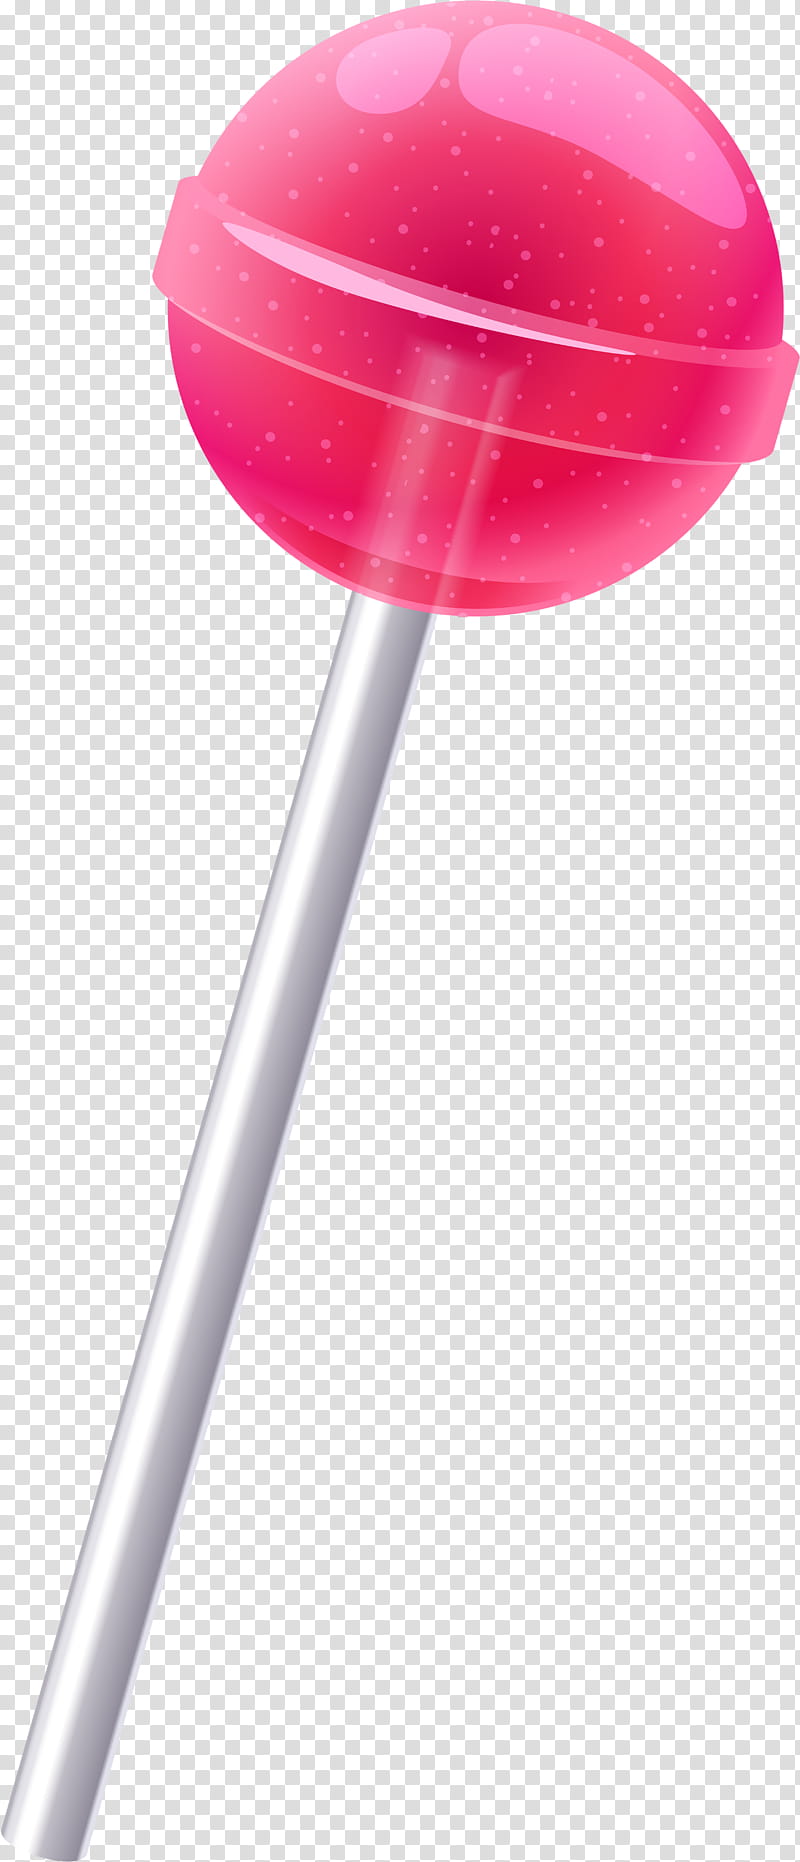 Lollipop, Candy, Chupa Chups, Swirl Pops Lollipop Suckers, Food, Confectionery, Material Property, Magenta transparent background PNG clipart